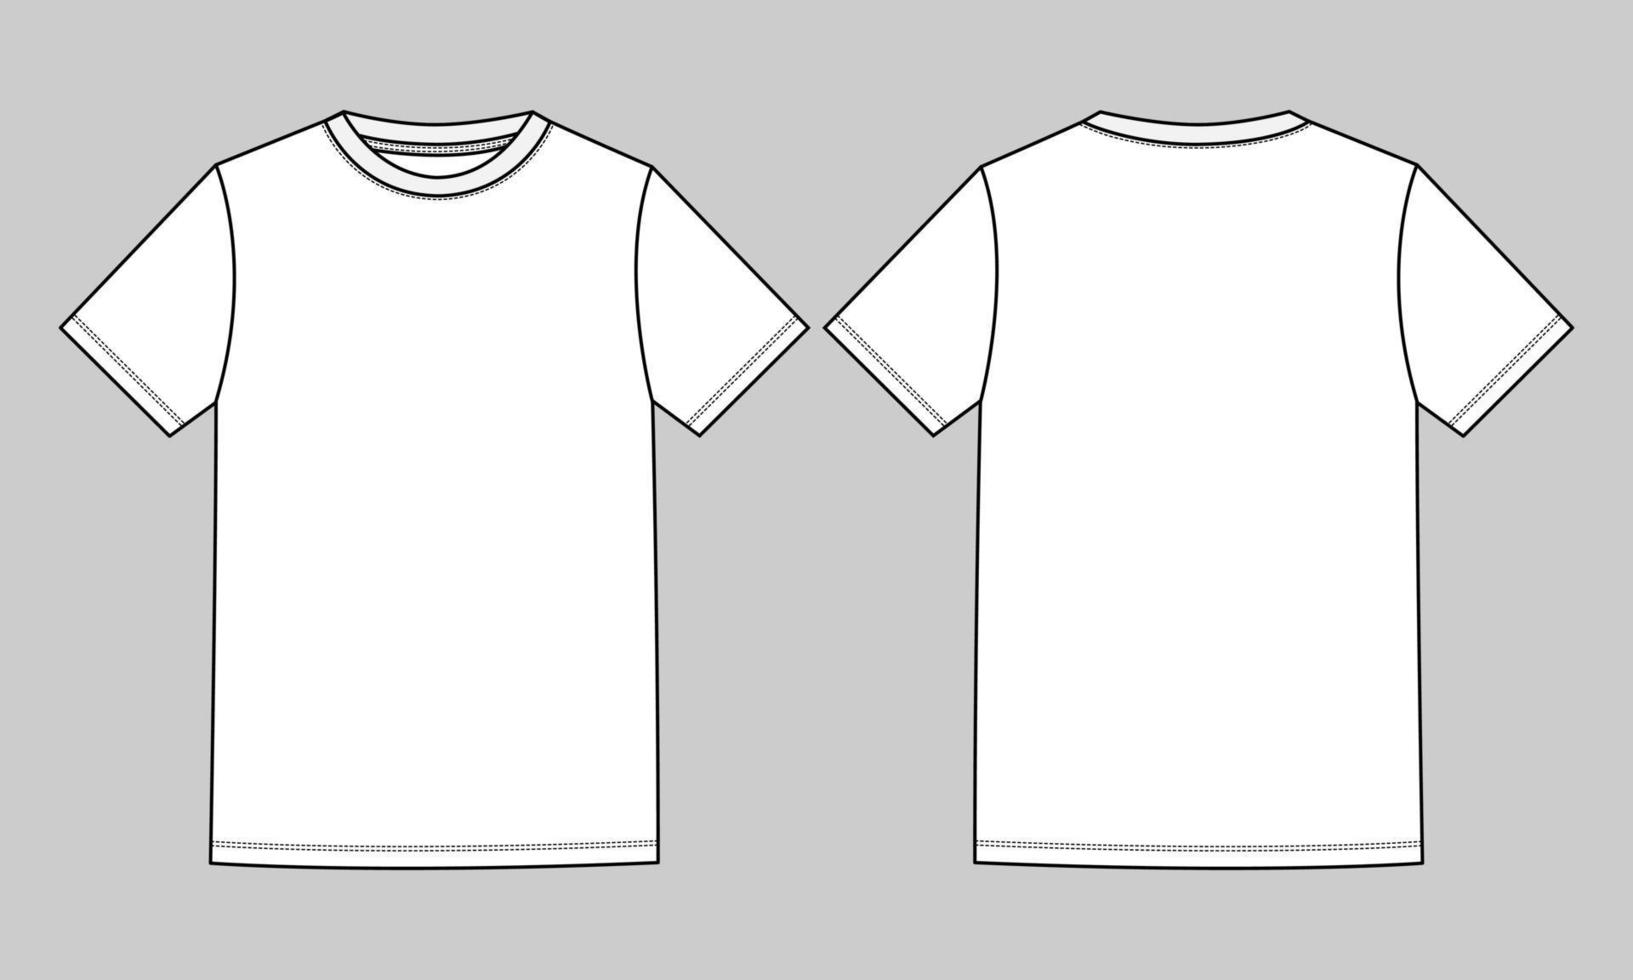 Technical drawing of shirts for boys. shirt flat sketch. vector • wall  stickers technical drawing, top, clothes | myloview.com